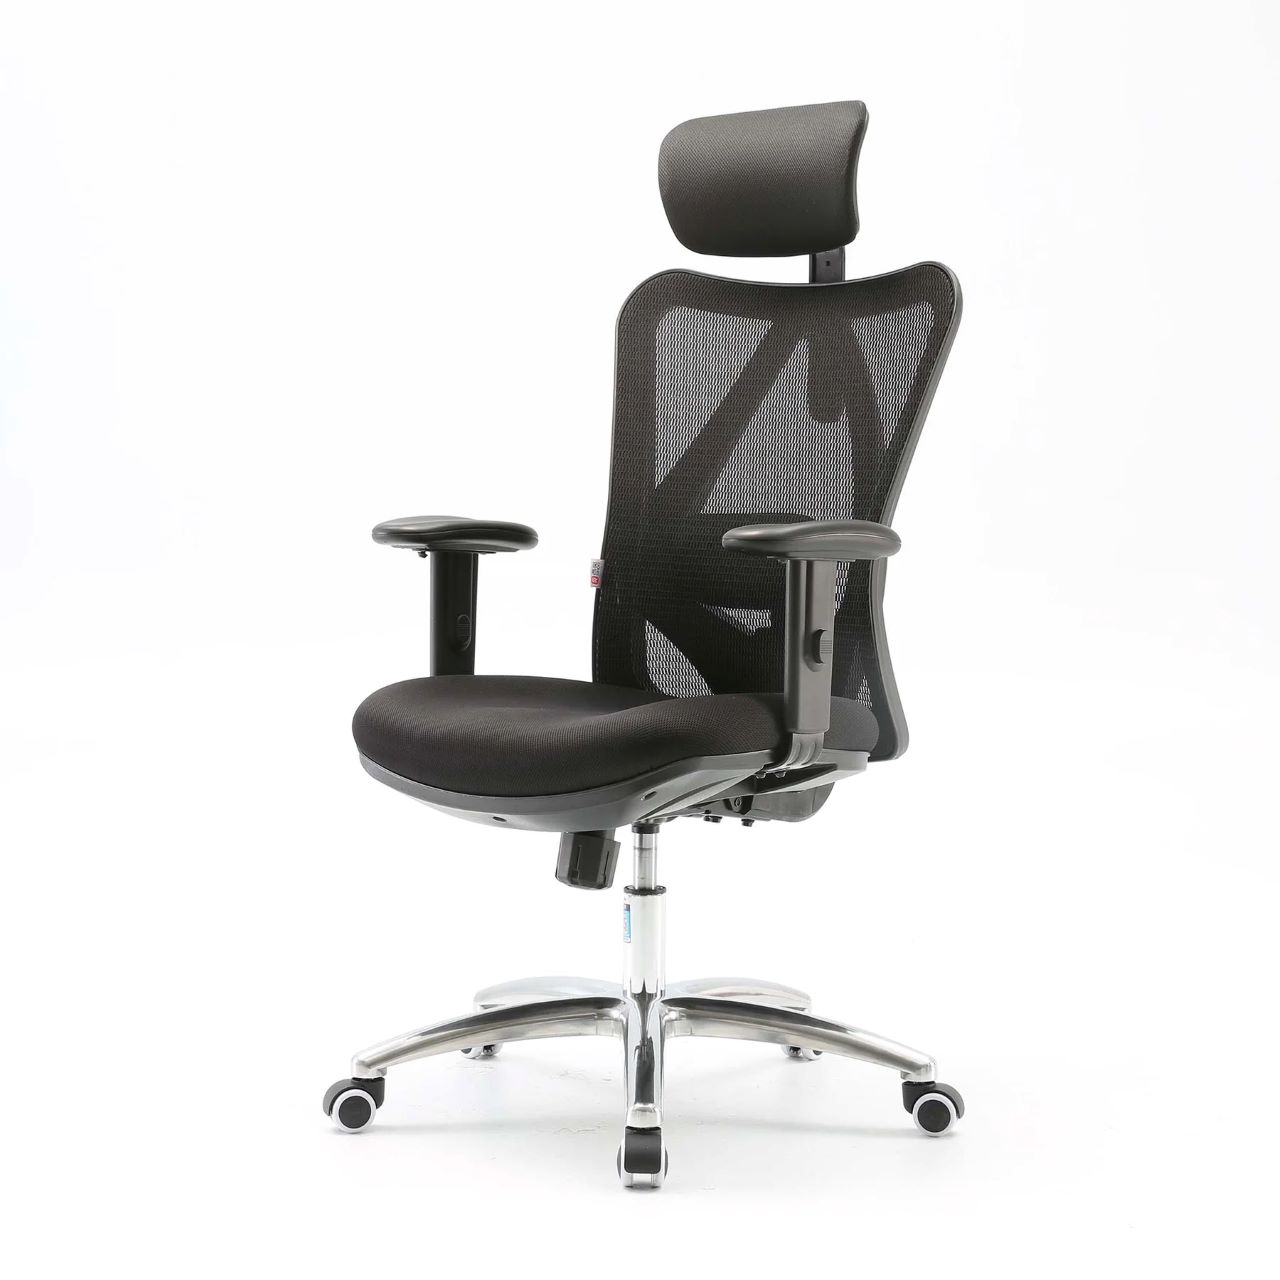 The SIHOO M18 Ergonomic Office, one of the ideal chairs for recording studio, has adjustable lumbar support with depth and height.